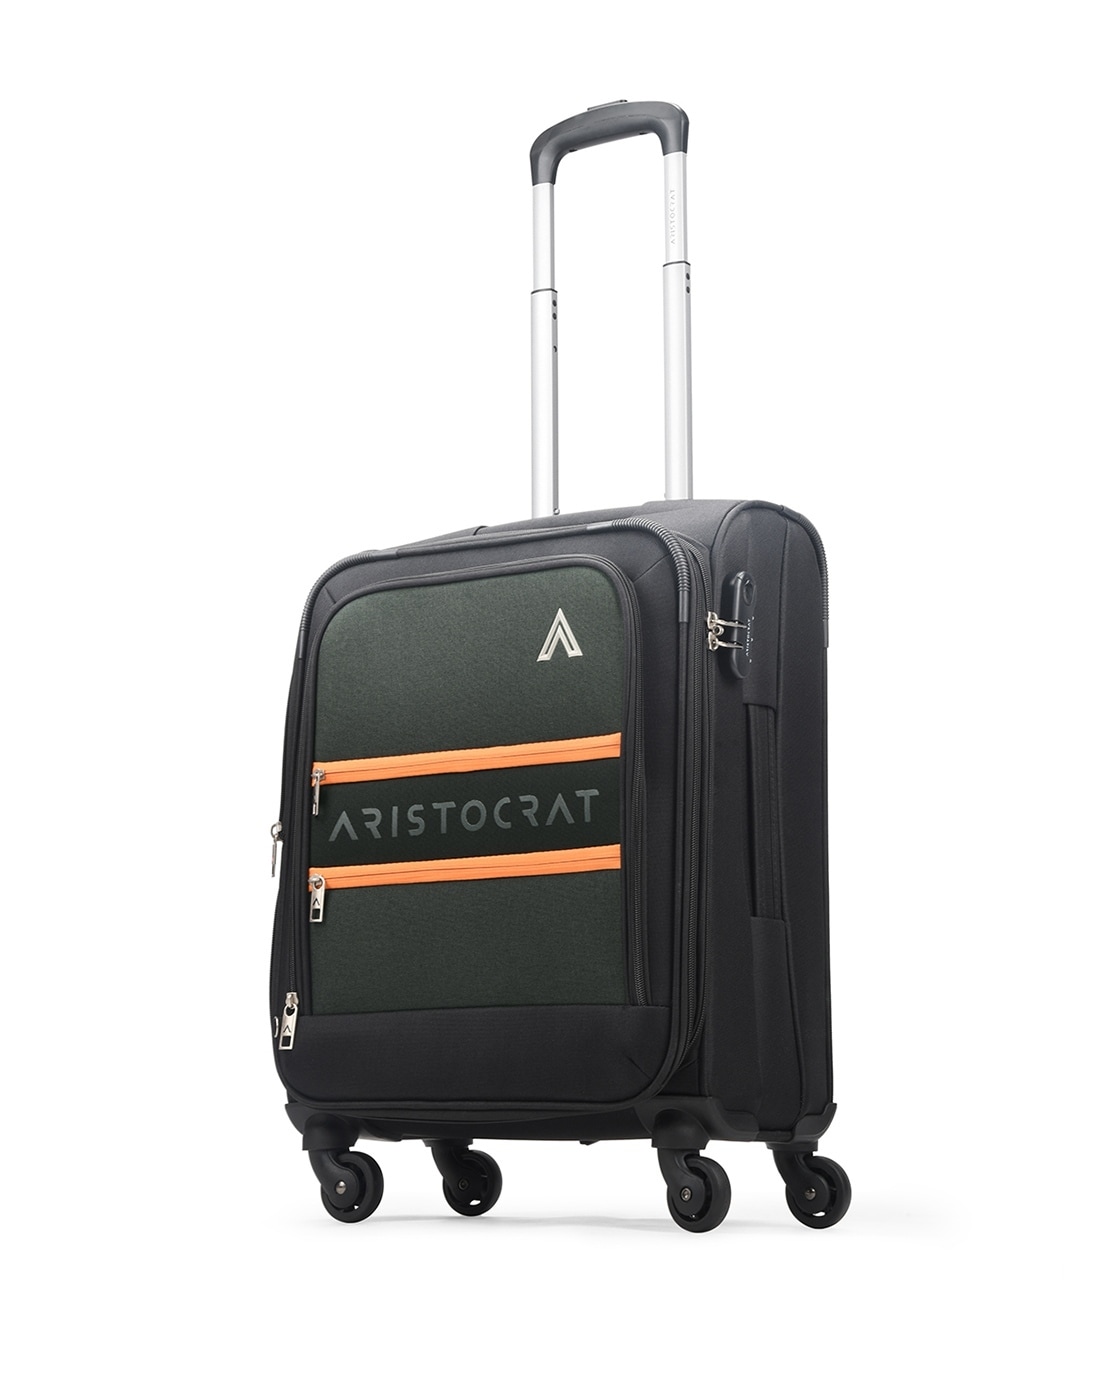 Buy Aristocrat Polyester Hard 50 Cms Luggage- Suitcase(Dfroo52Etbl_Teal  Blue) Polyester 28 Cms Travel Bag(DFCAD53ENBL_Navy Blue) at Amazon.in